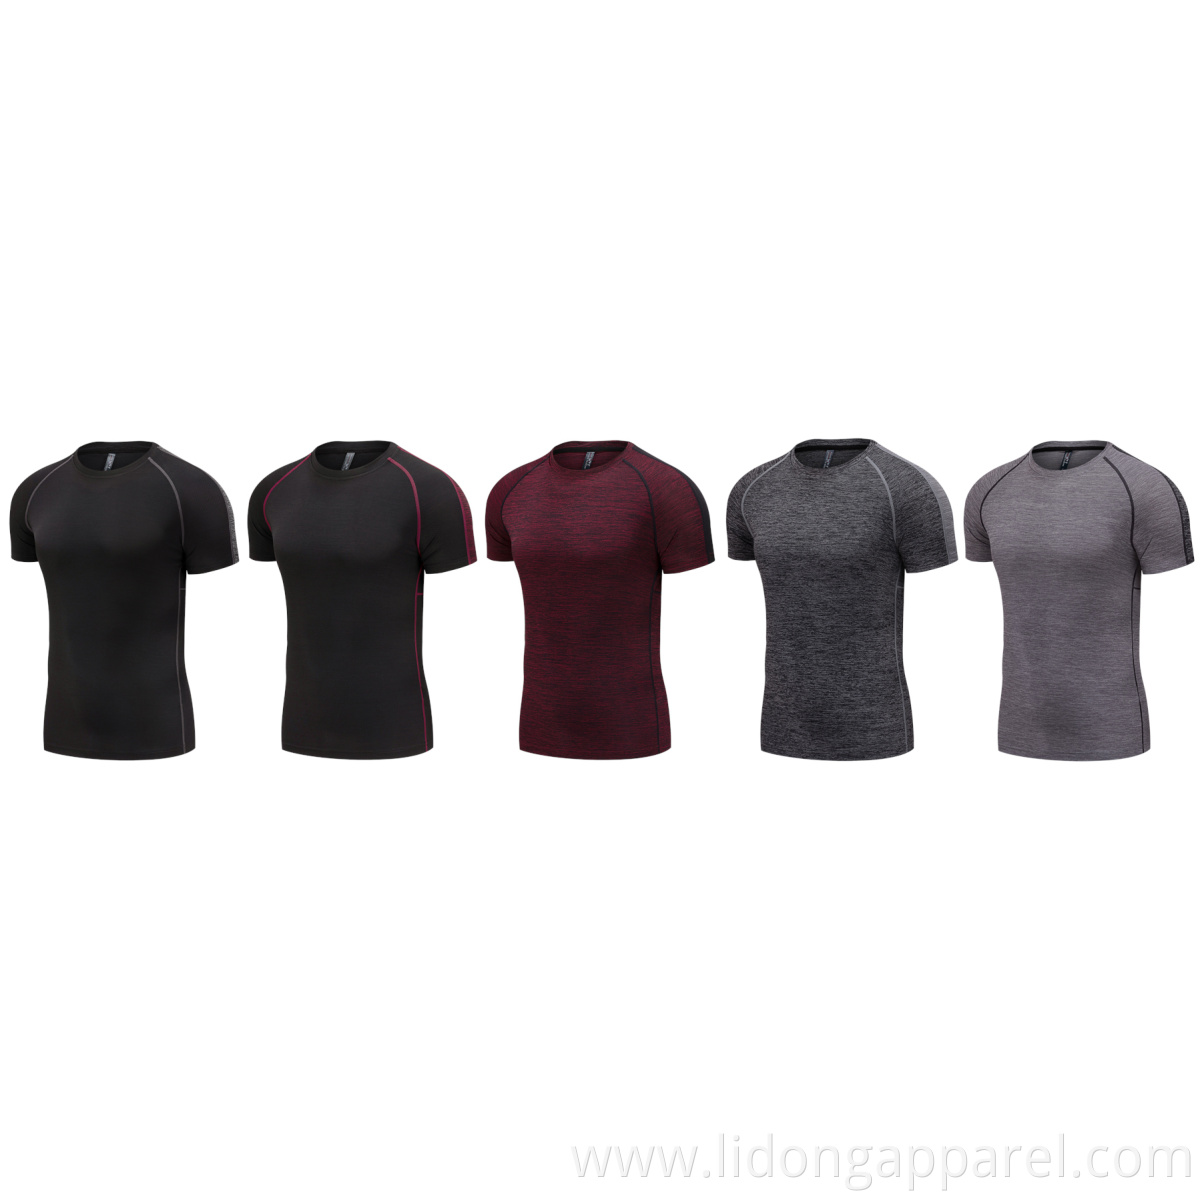 Men Quick Dry Running T Shirt tight Tops Breathable gym sports wear T-shirts running wear